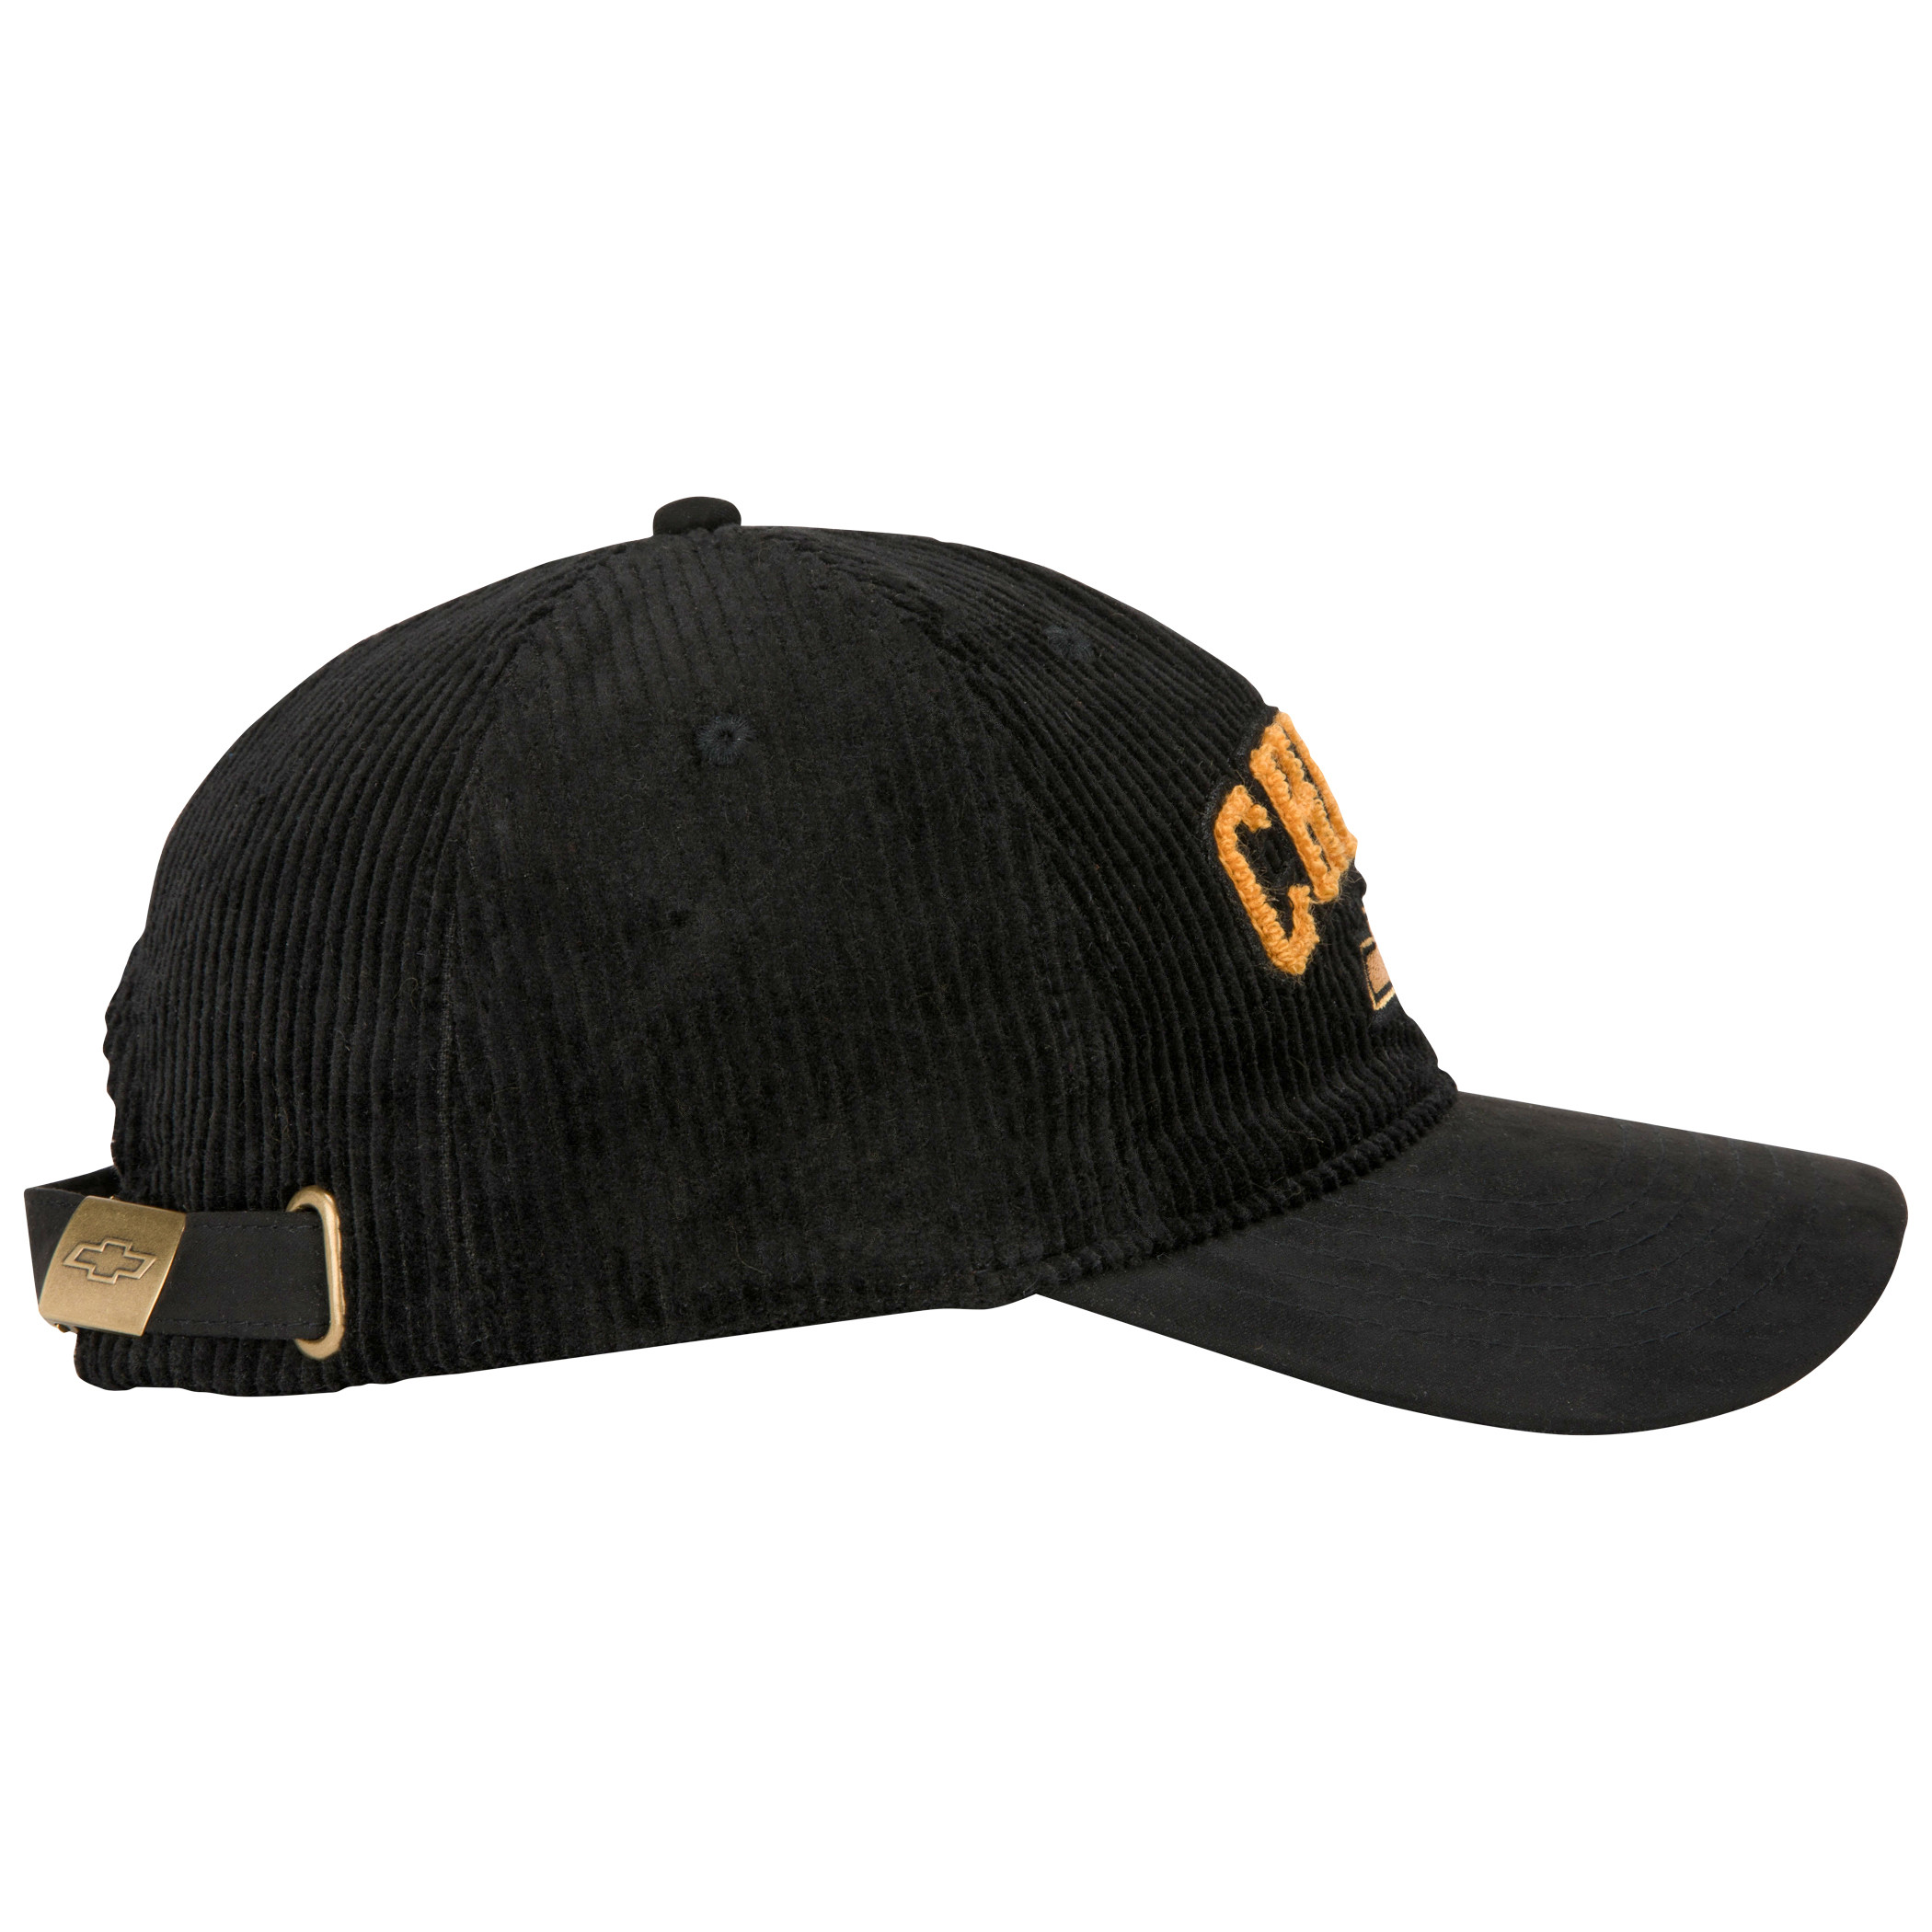 Chevy Chenille Logo Patch Corduroy Hat